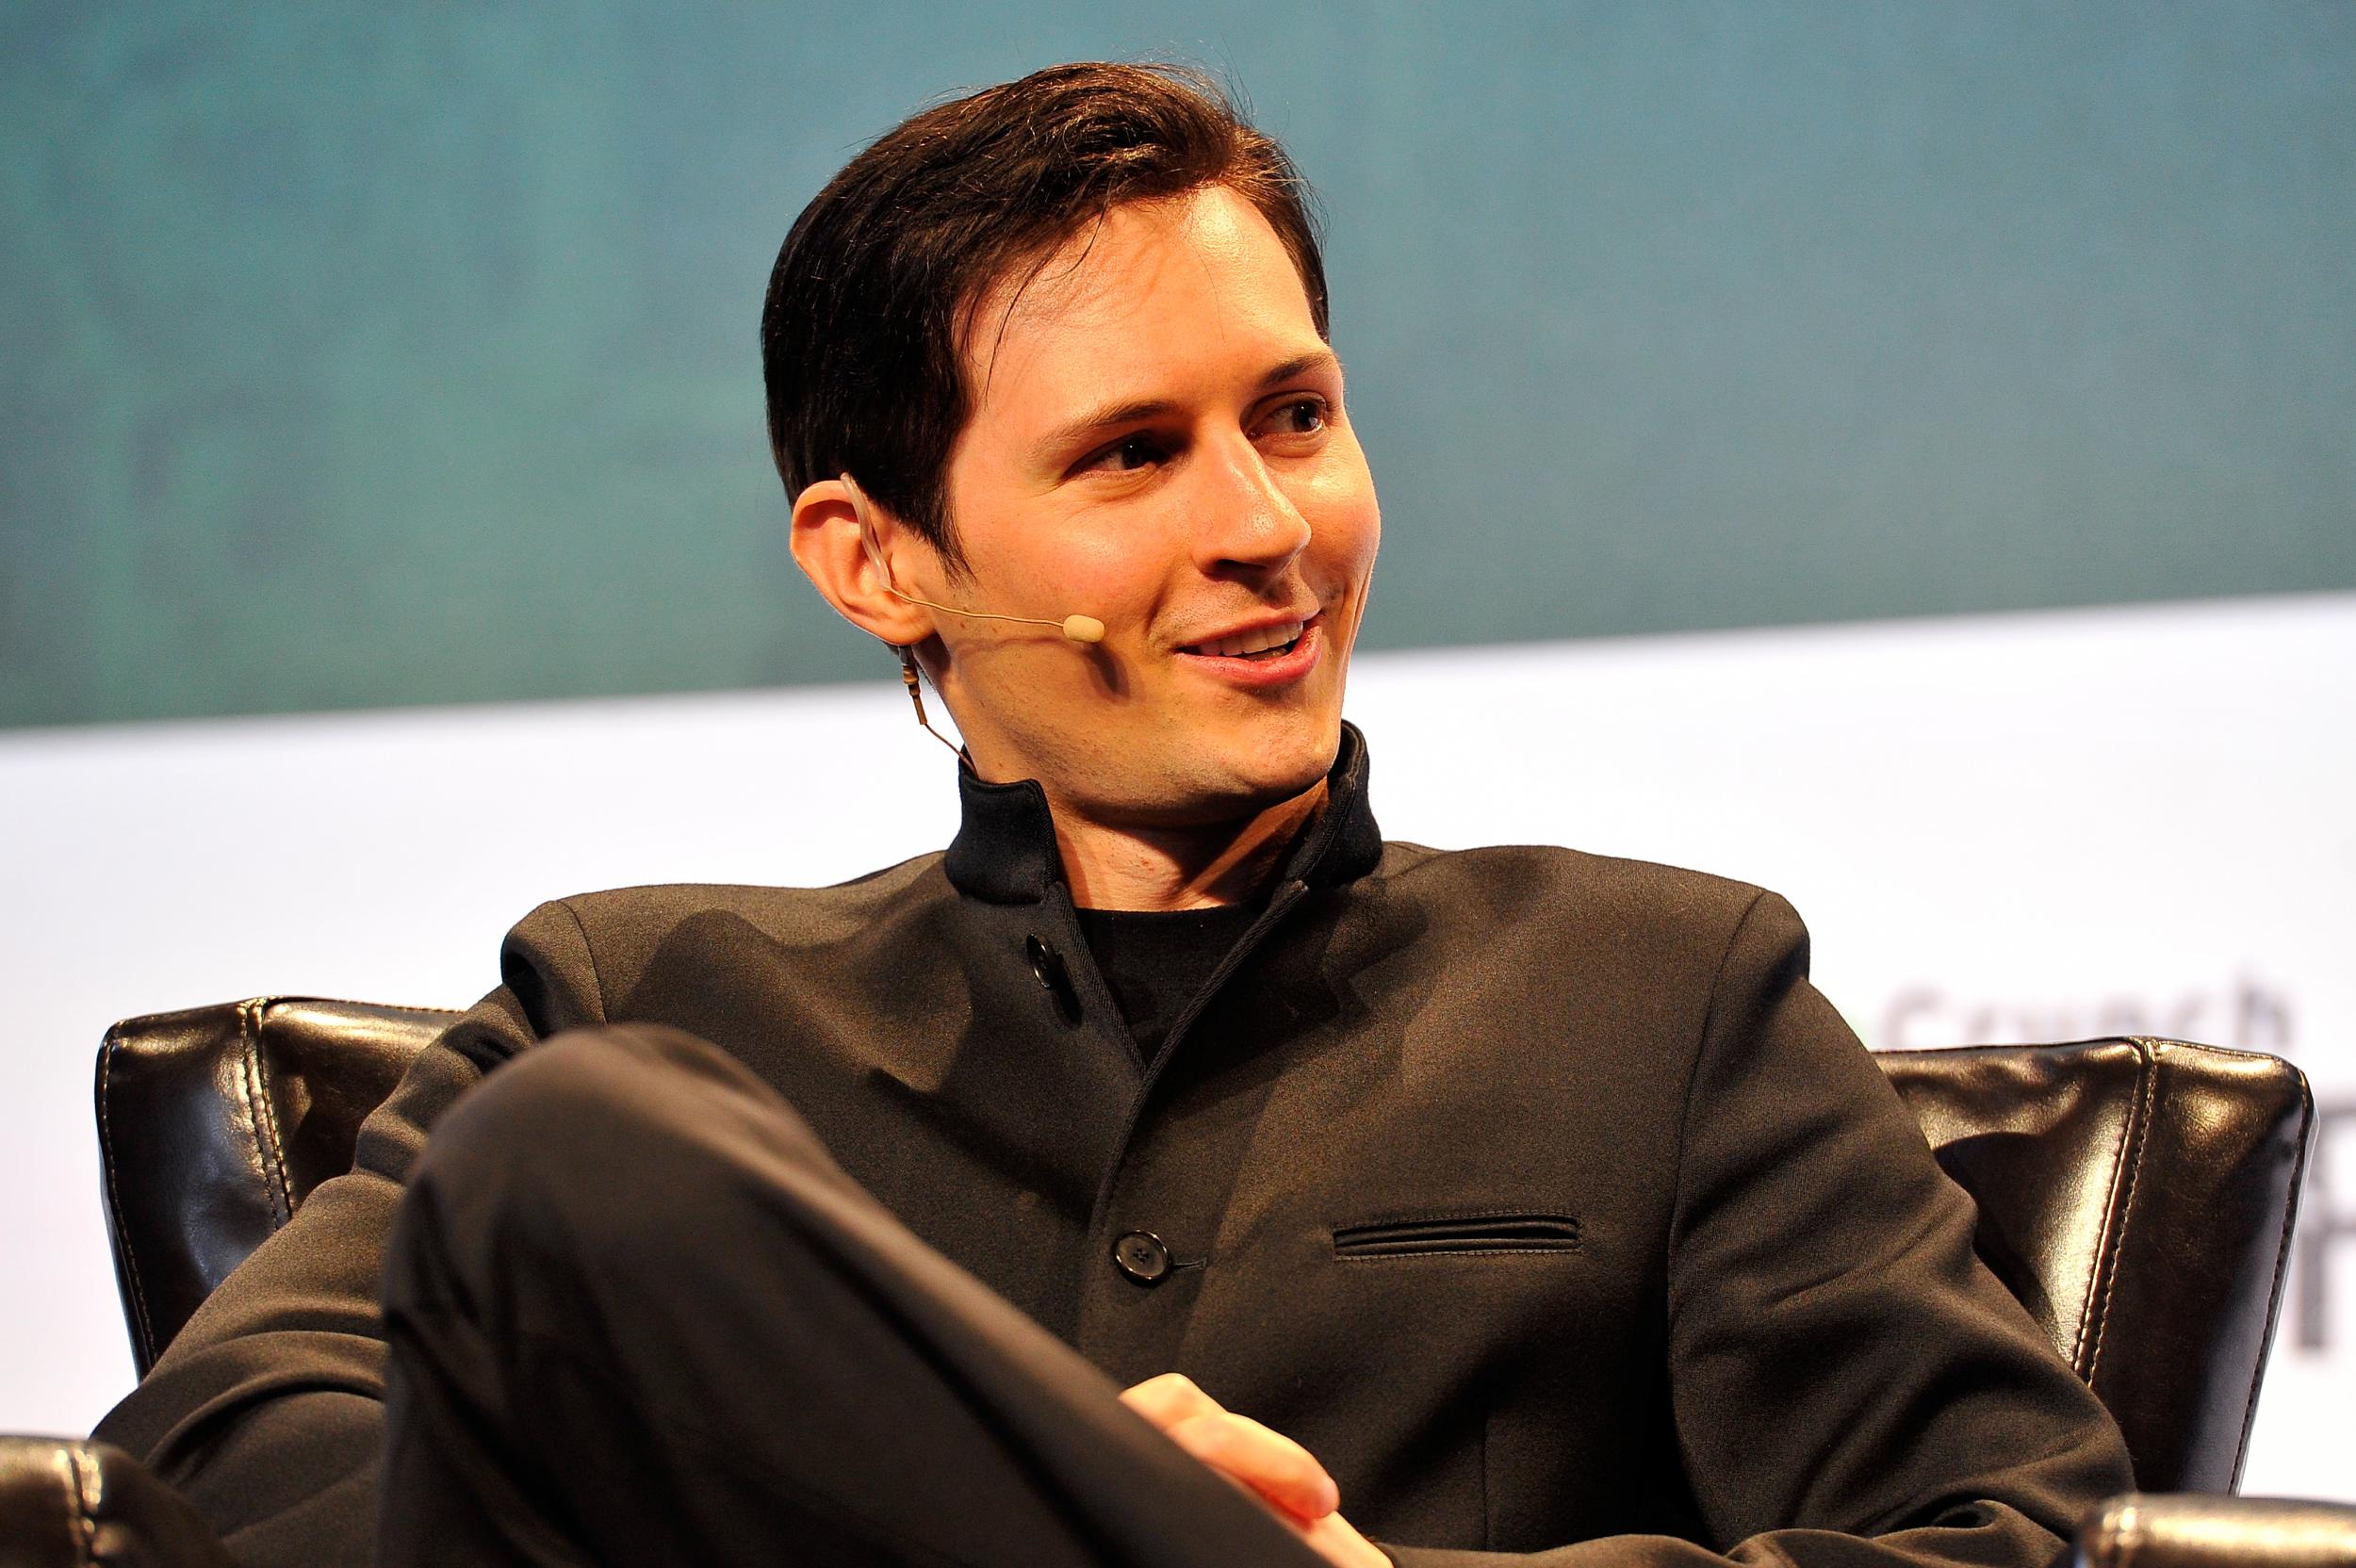 Pavel Durov, co-founder and chief executive of Telegram, speaks at the TechCrunch Disrupt conference in San Francisco in 2015